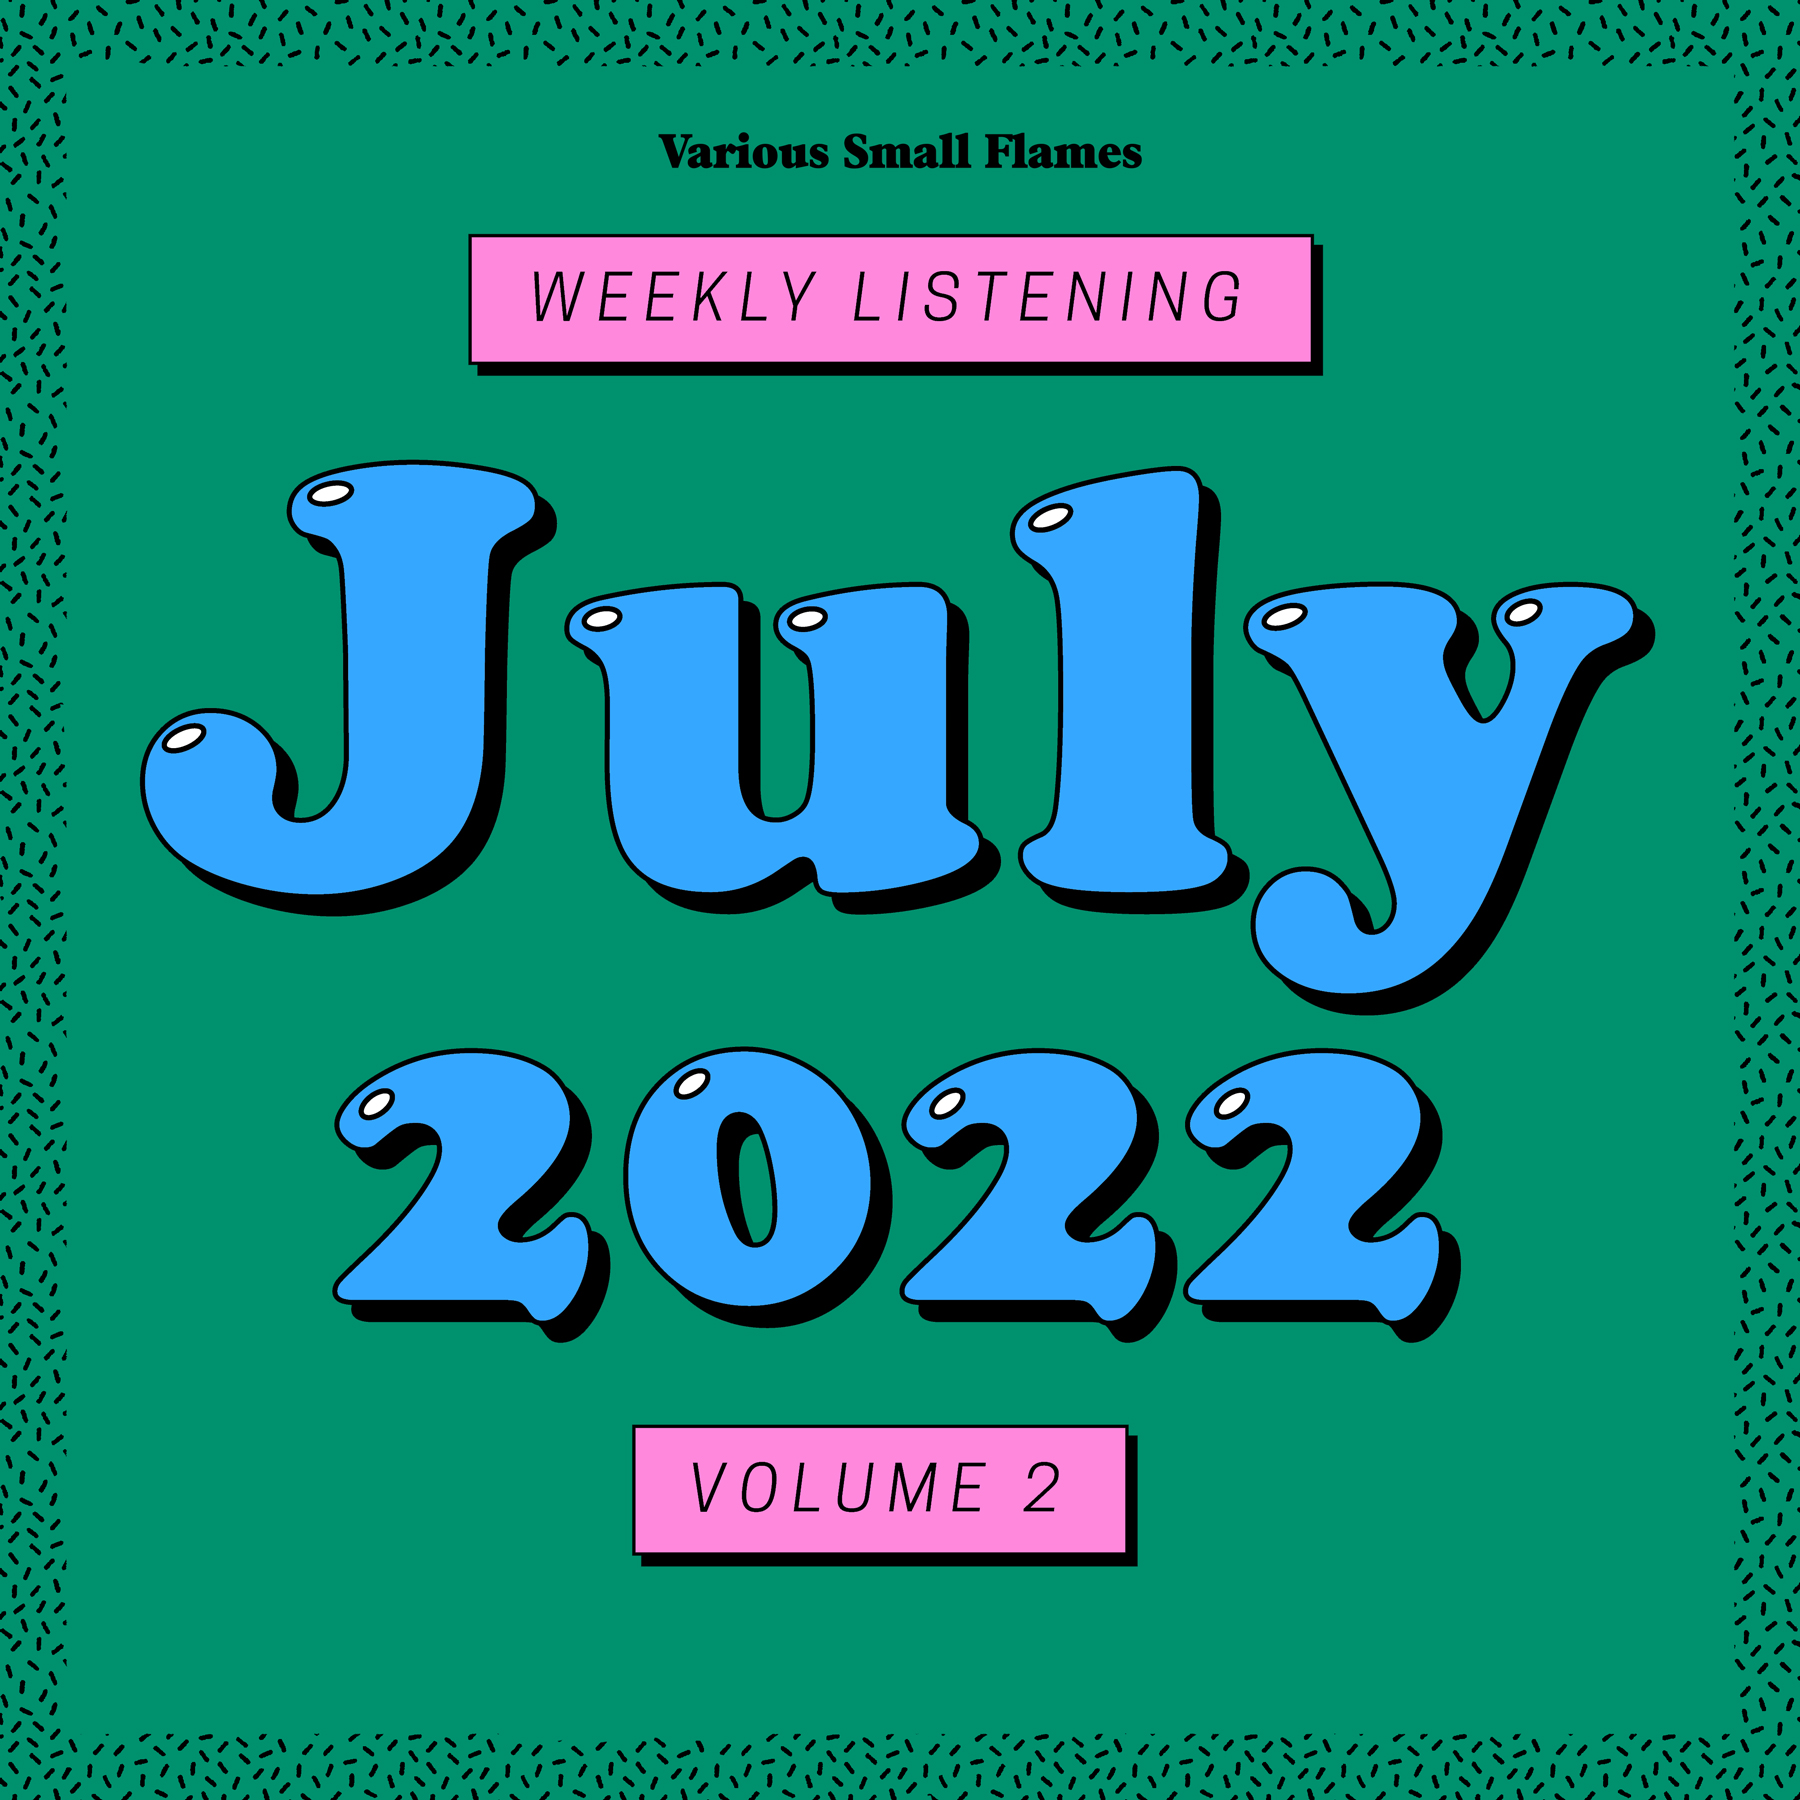 weekly listening july 2022 volume 2 various small flames